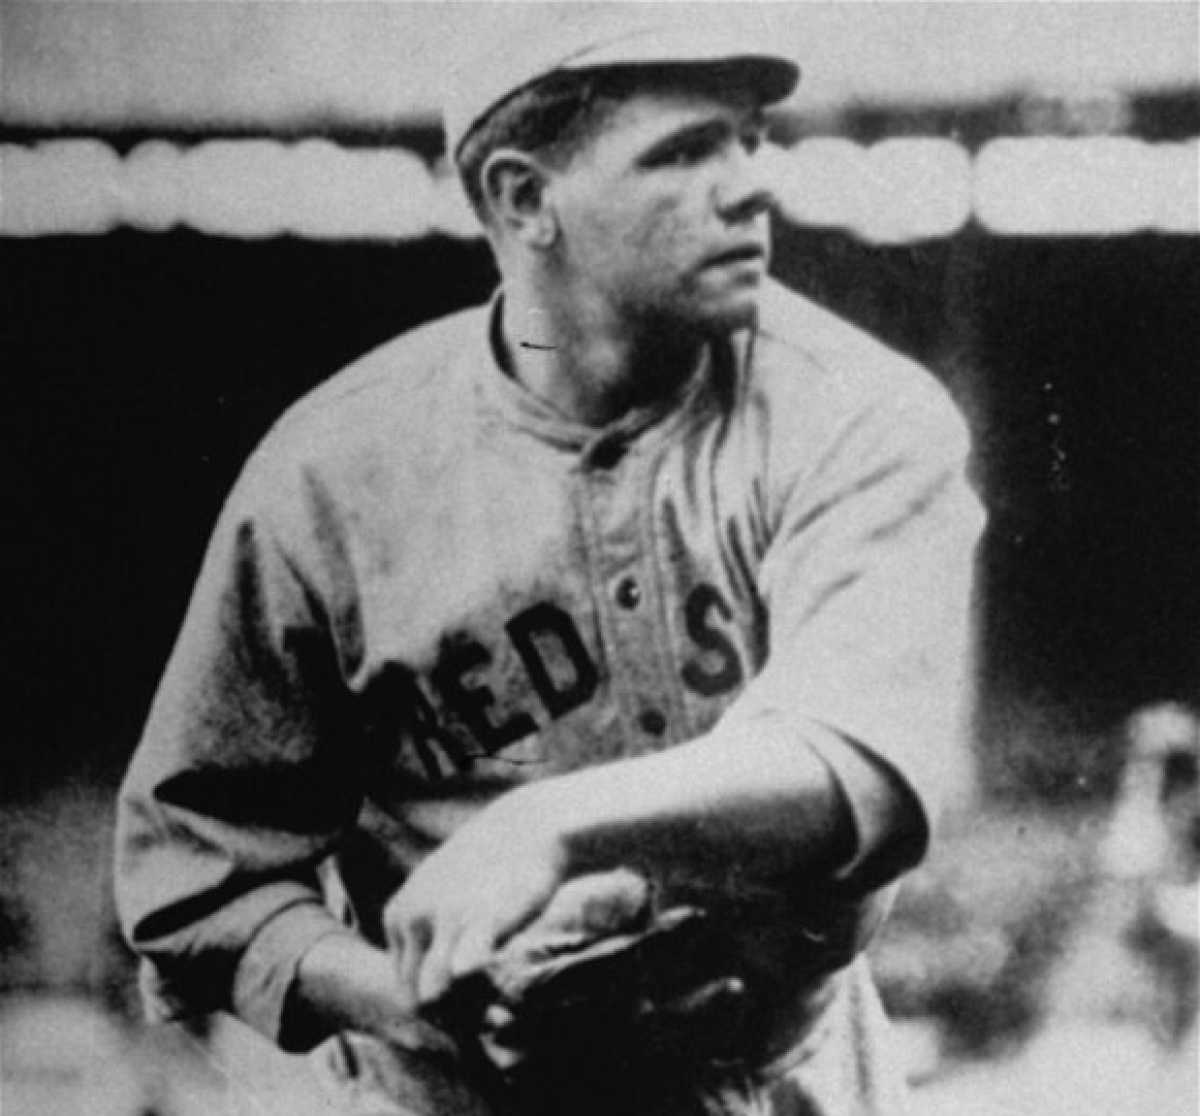 Baseball legend Babe Ruth with the Boston Red Sox in 1916.